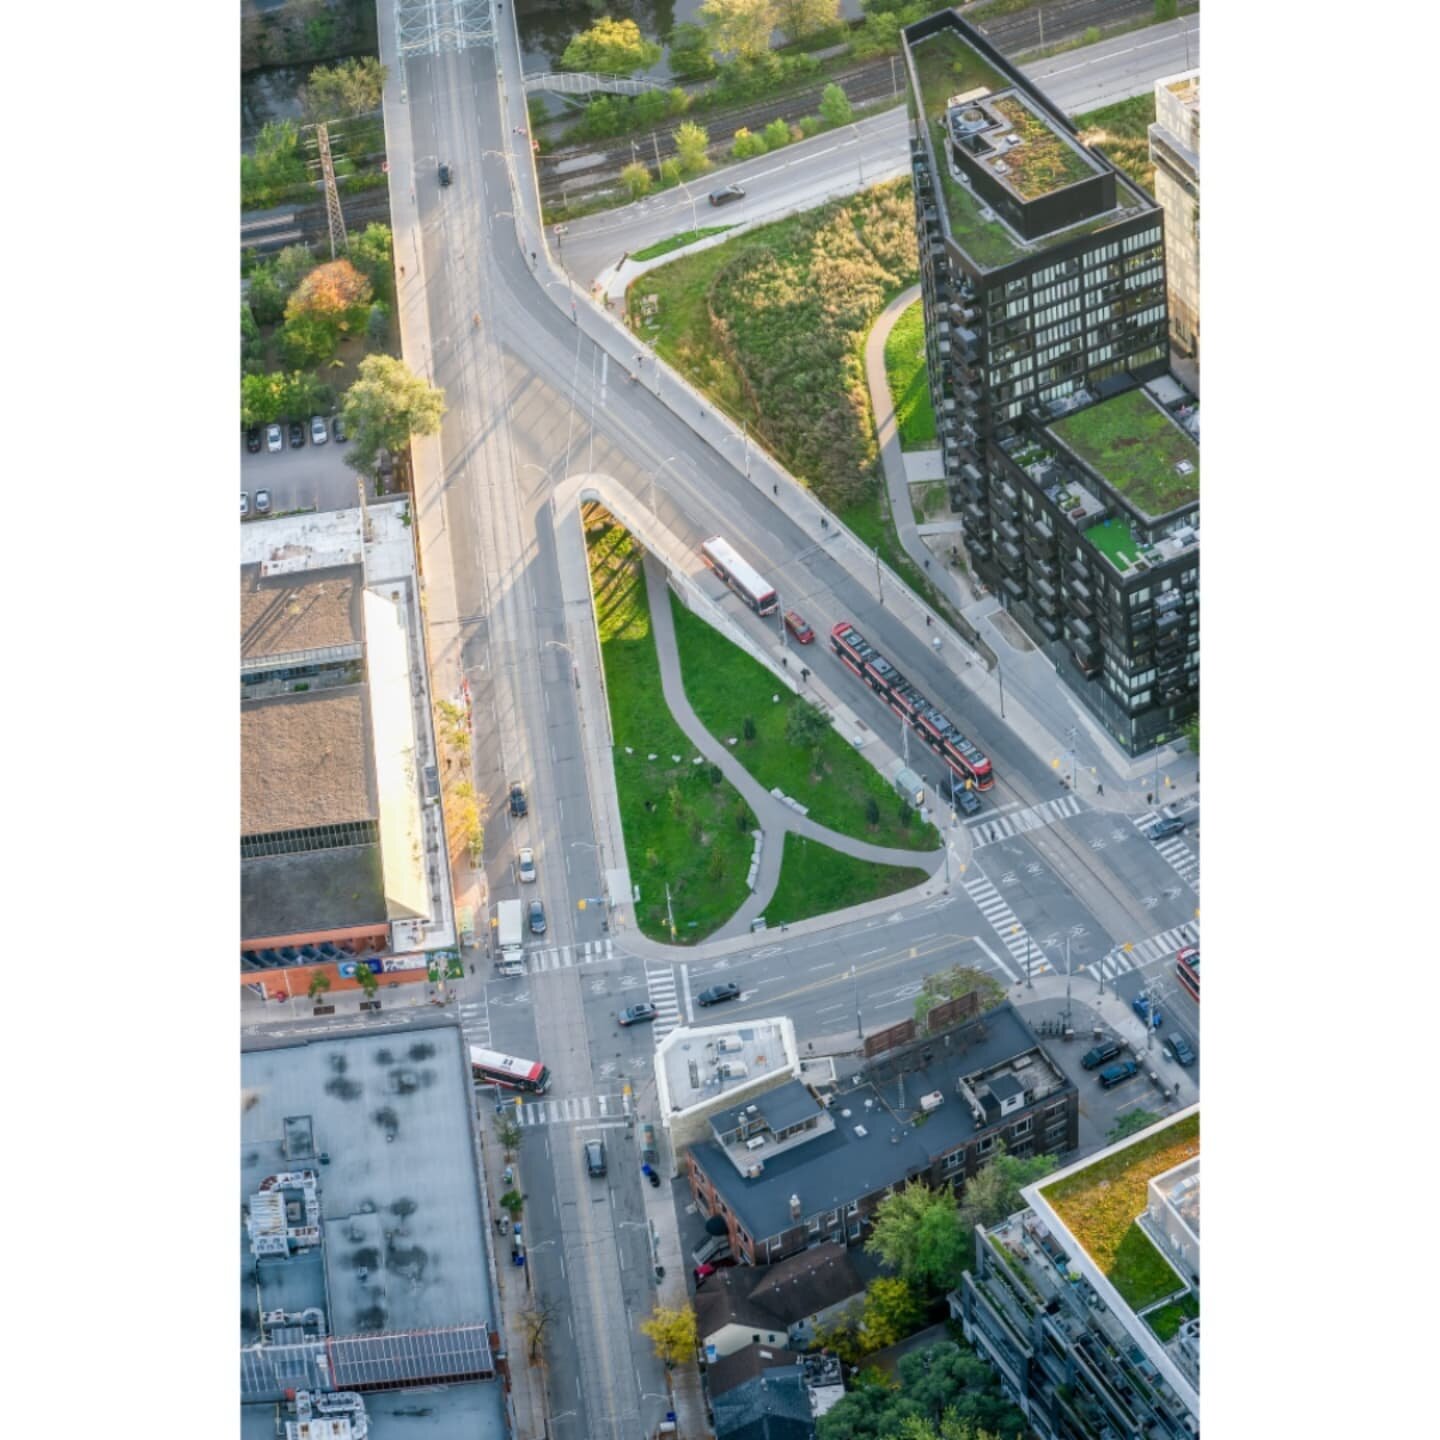 Landscape details from the air 🚁
.
Aerial photography for @waterfront.to with @carolina_soderholm and piloted by @heliofaview
.
#aerialphotography #torontolandscape #waterfronttoronto